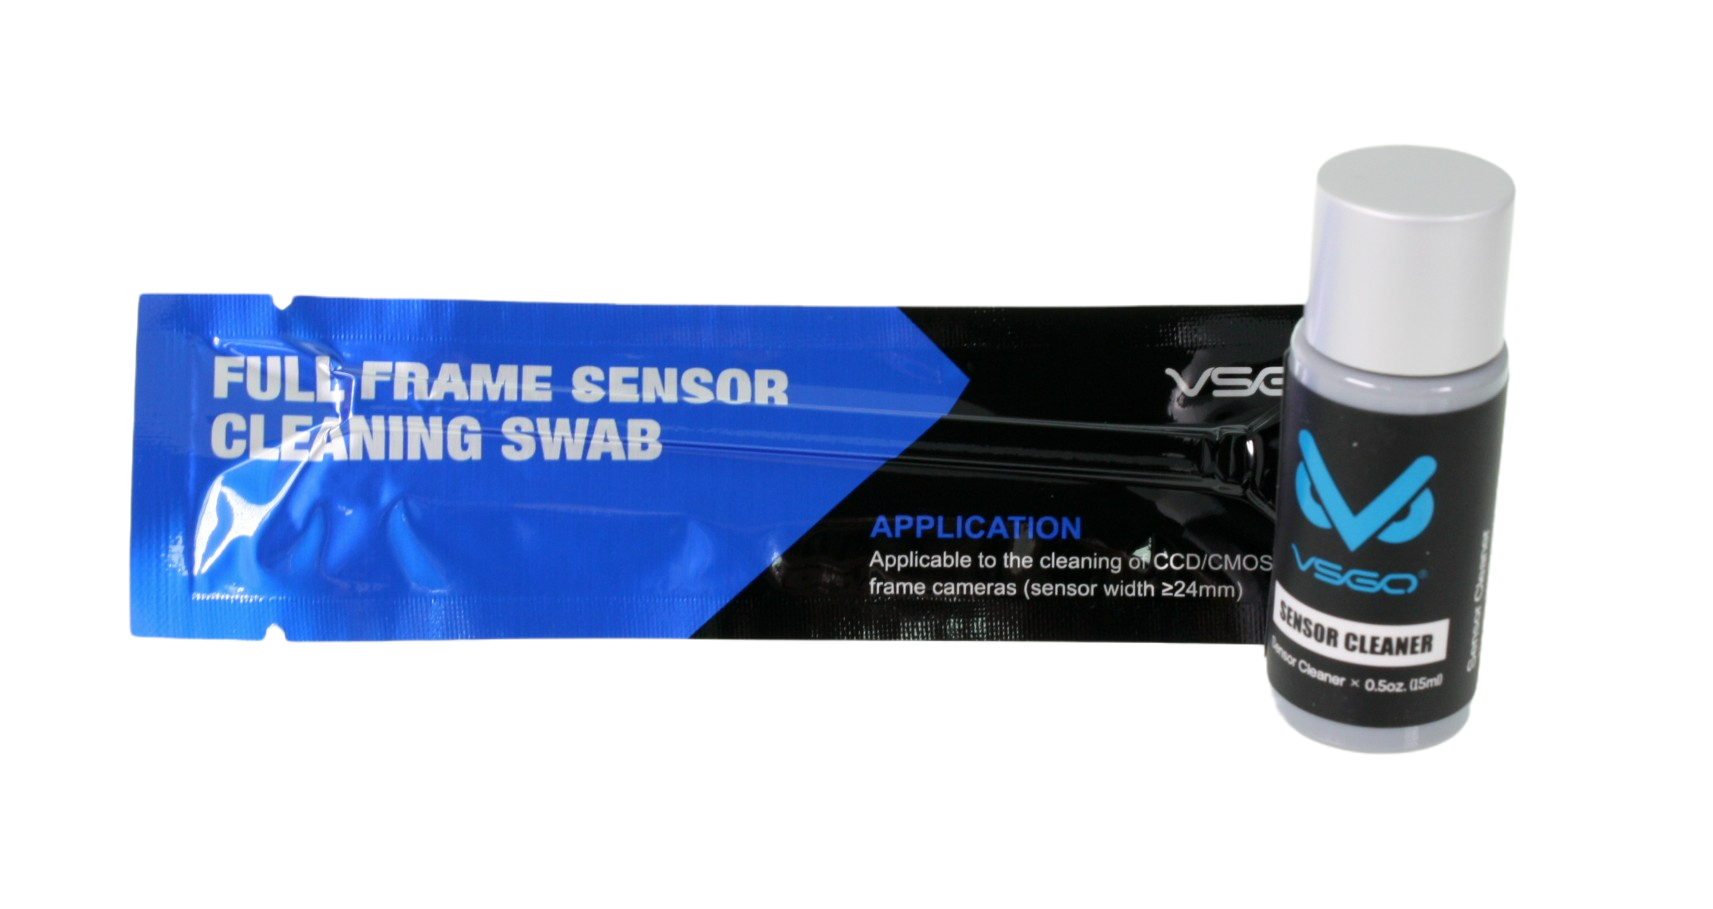 Sensor cleaning fluid and swabs